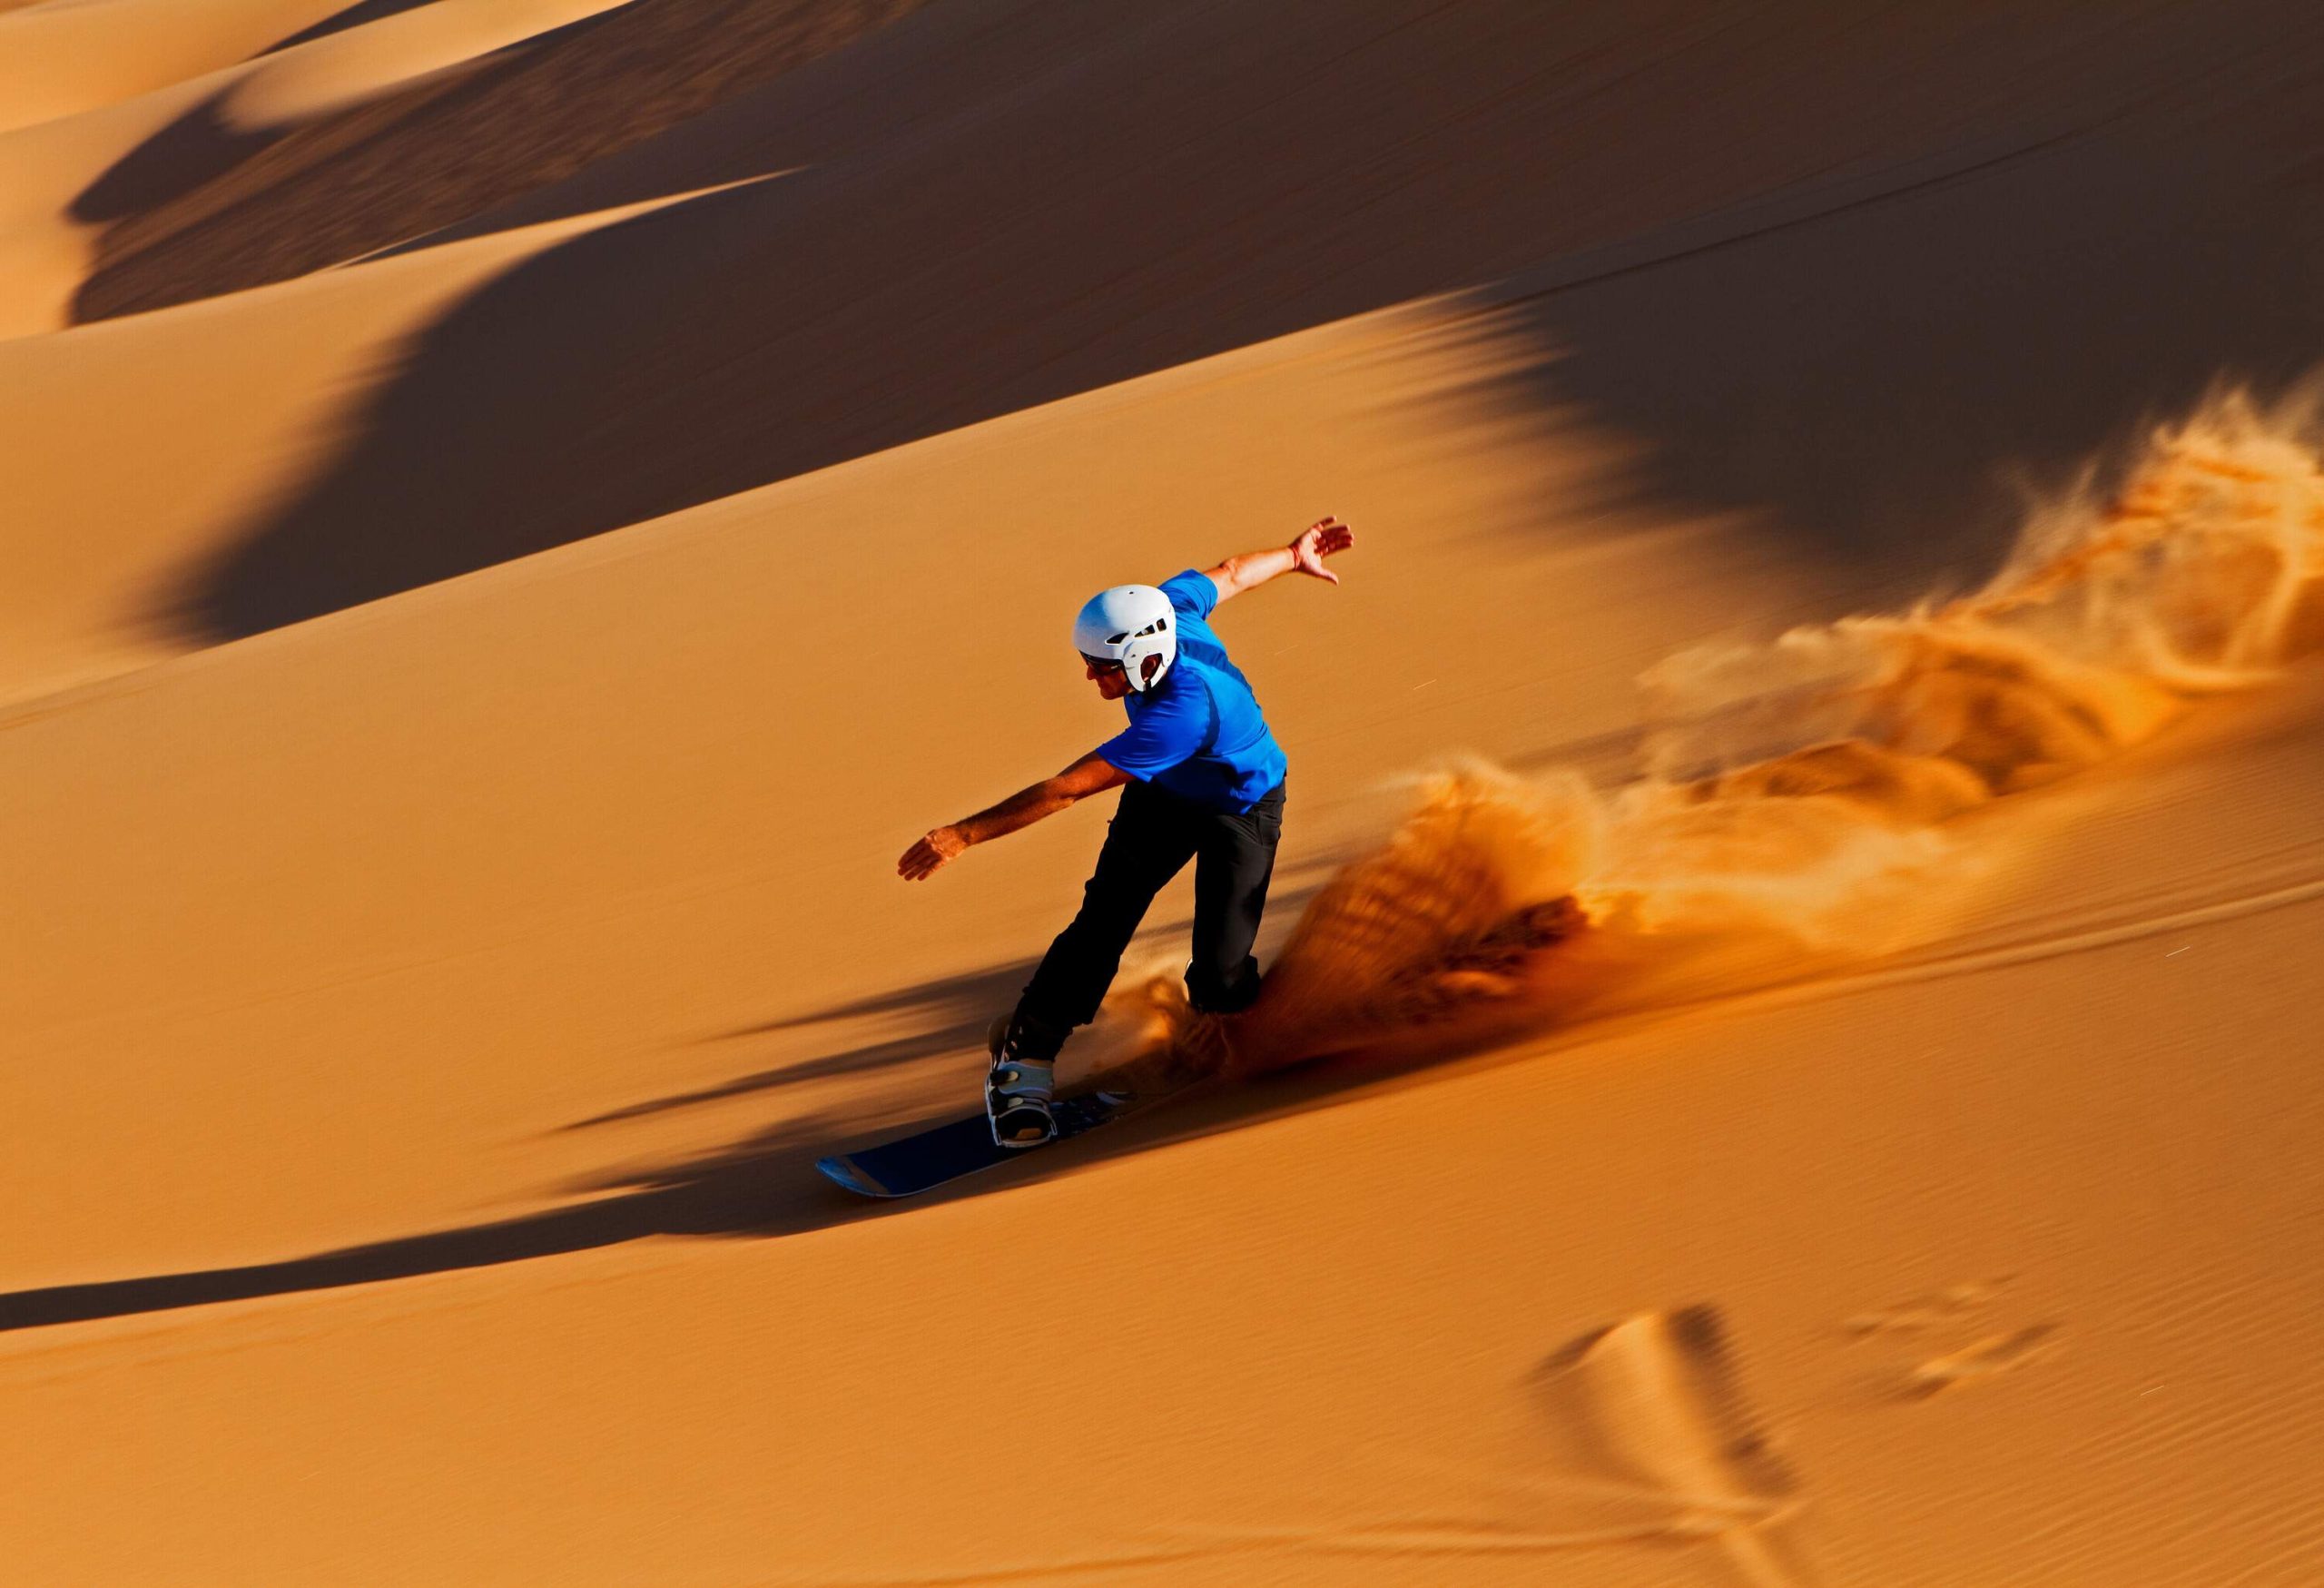 A man in a blue shirt and a white helmet sandboarding, leaving a trail of dust behind him.